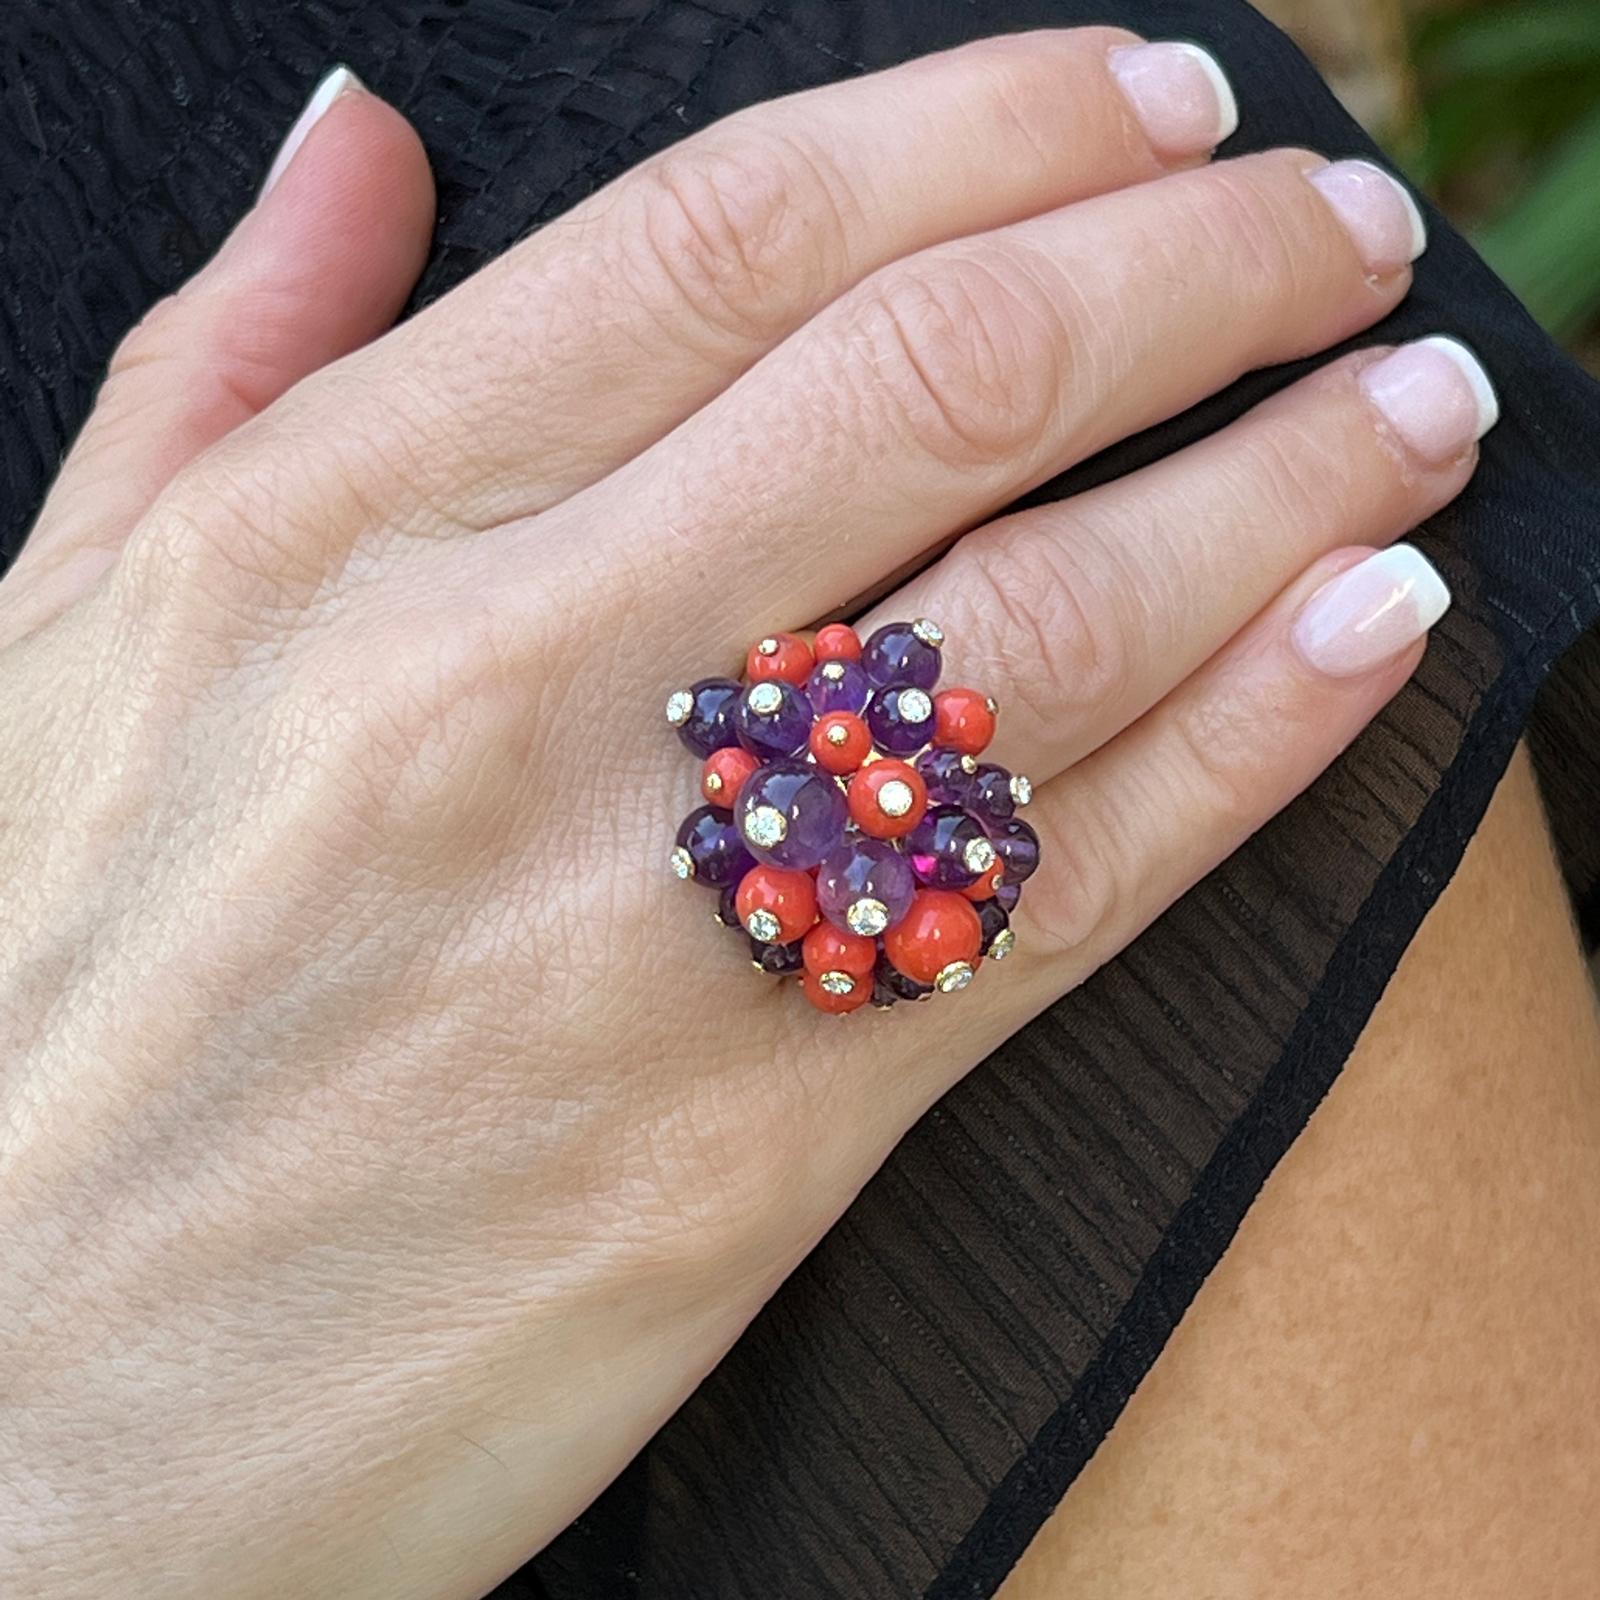 Cartier Delices De Goa cocktail ring handcrafted in 18 karat yellow gold. The colorful ring features amethyst and coral beads set with 14 round brilliant cut diamonds weighing approximately .43 CTW. The diamonds are graded F-G color and VVS-VS